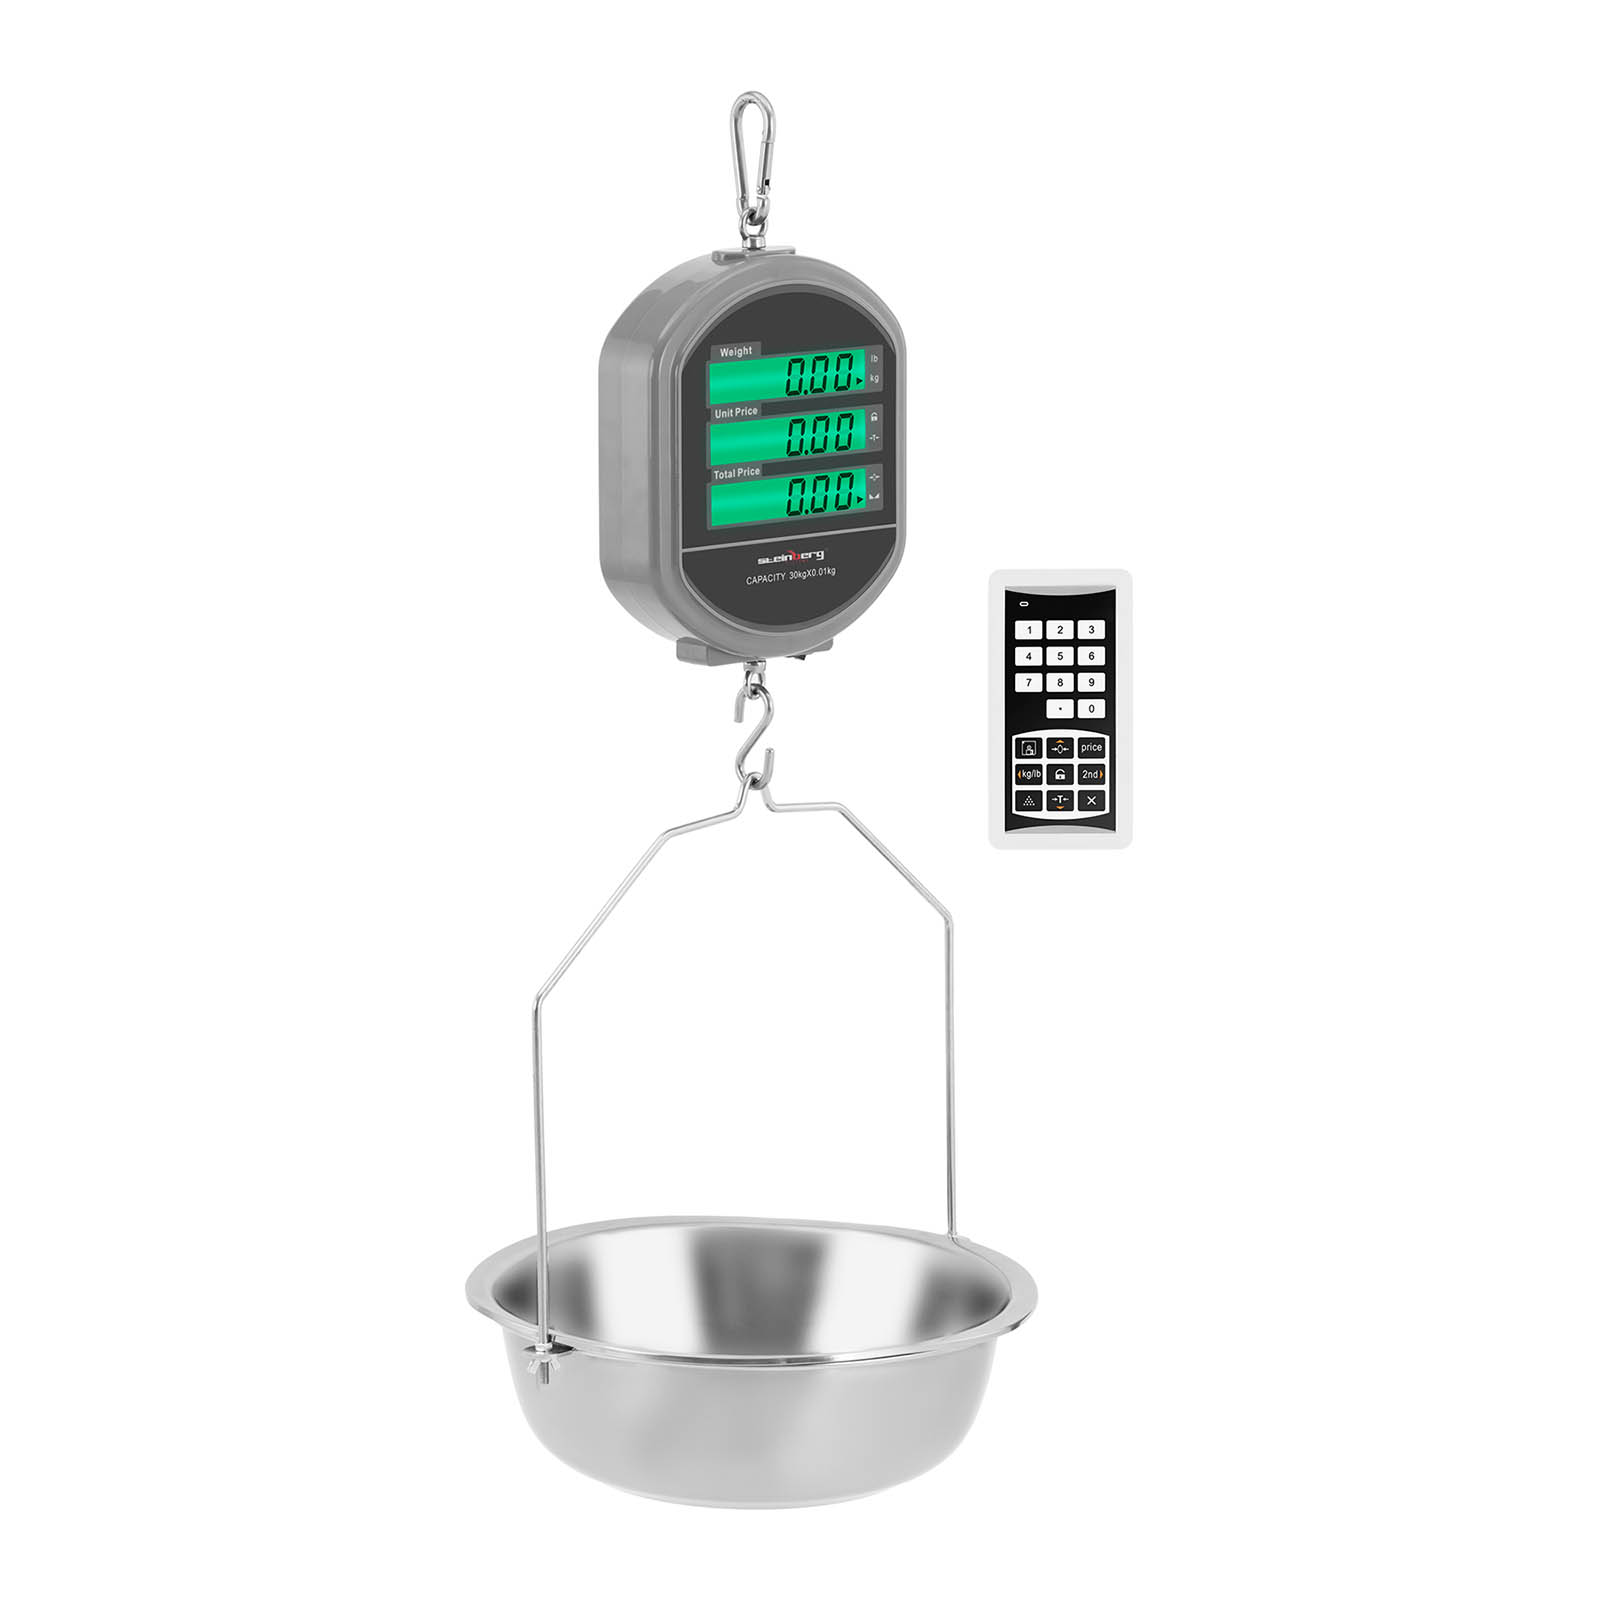 Hanging Scale - 0.1 - 30 kg / 10 g - LCD display - remote control